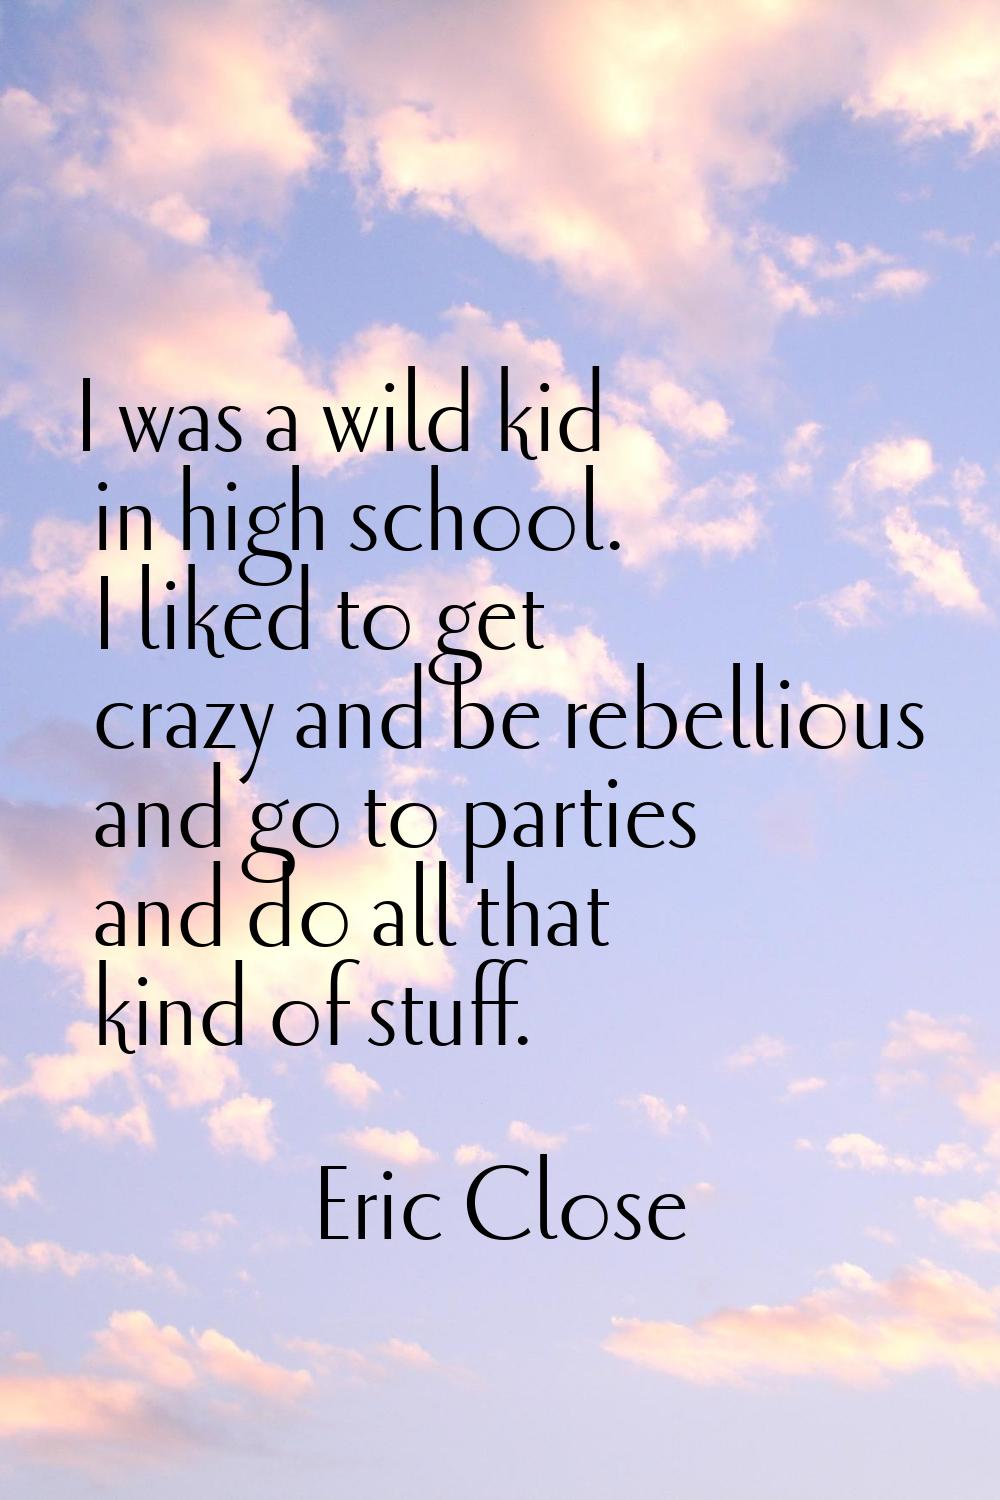 I was a wild kid in high school. I liked to get crazy and be rebellious and go to parties and do al